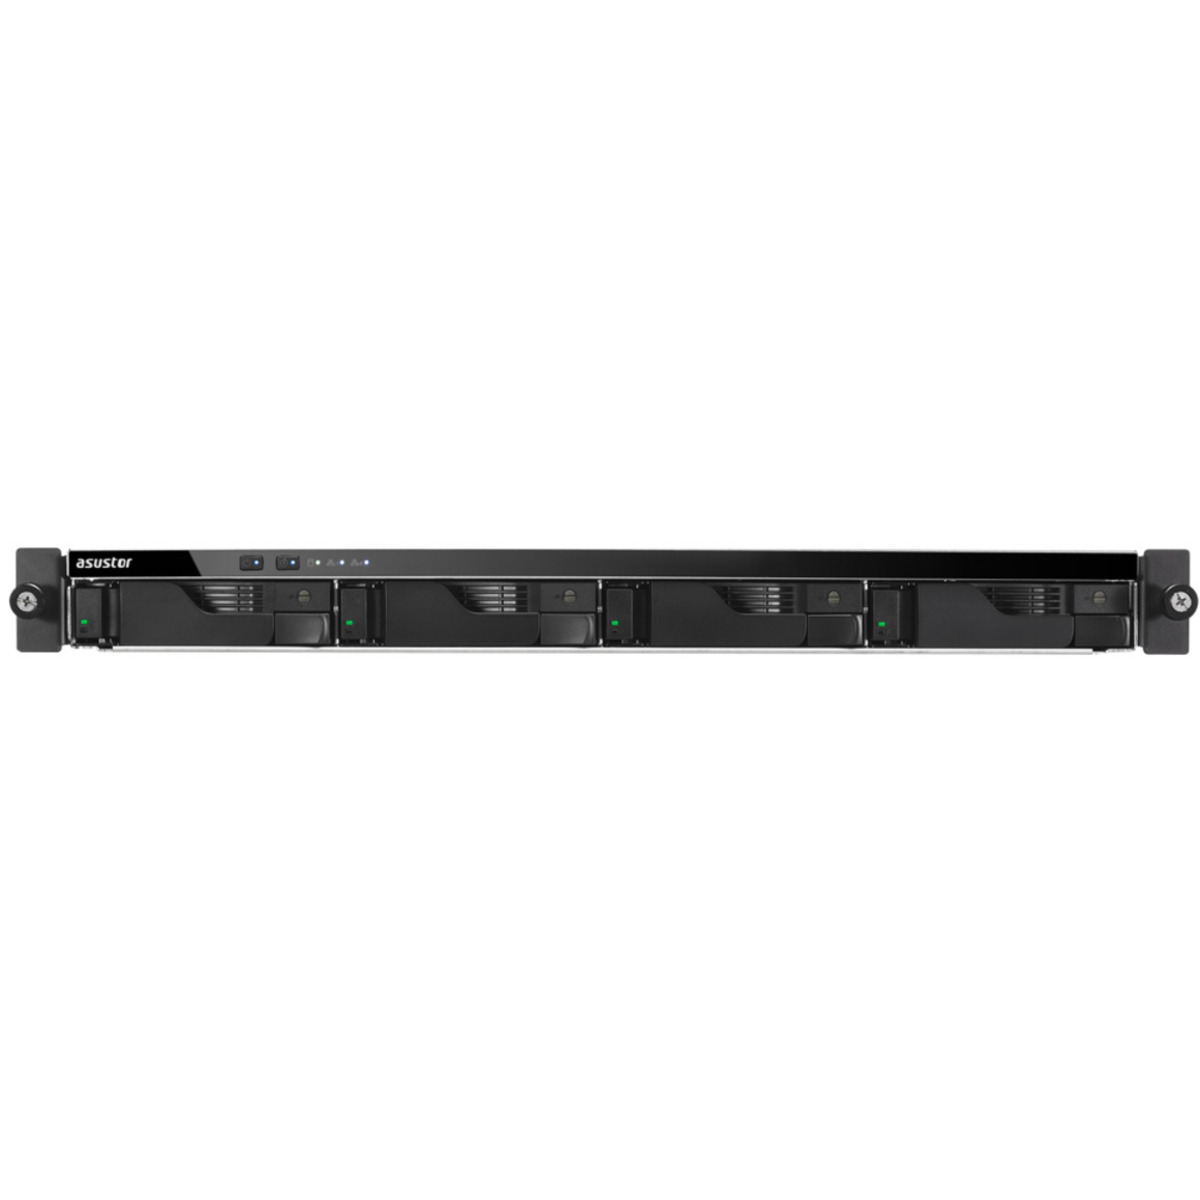 ASUSTOR LOCKERSTOR 4RD AS6504RD 24tb 4-Bay RackMount Multimedia / Power User / Business NAS - Network Attached Storage Device 4x6tb Western Digital Red Plus WD60EFPX 3.5 5640rpm SATA 6Gb/s HDD NAS Class Drives Installed - Burn-In Tested - FREE RAM UPGRADE LOCKERSTOR 4RD AS6504RD